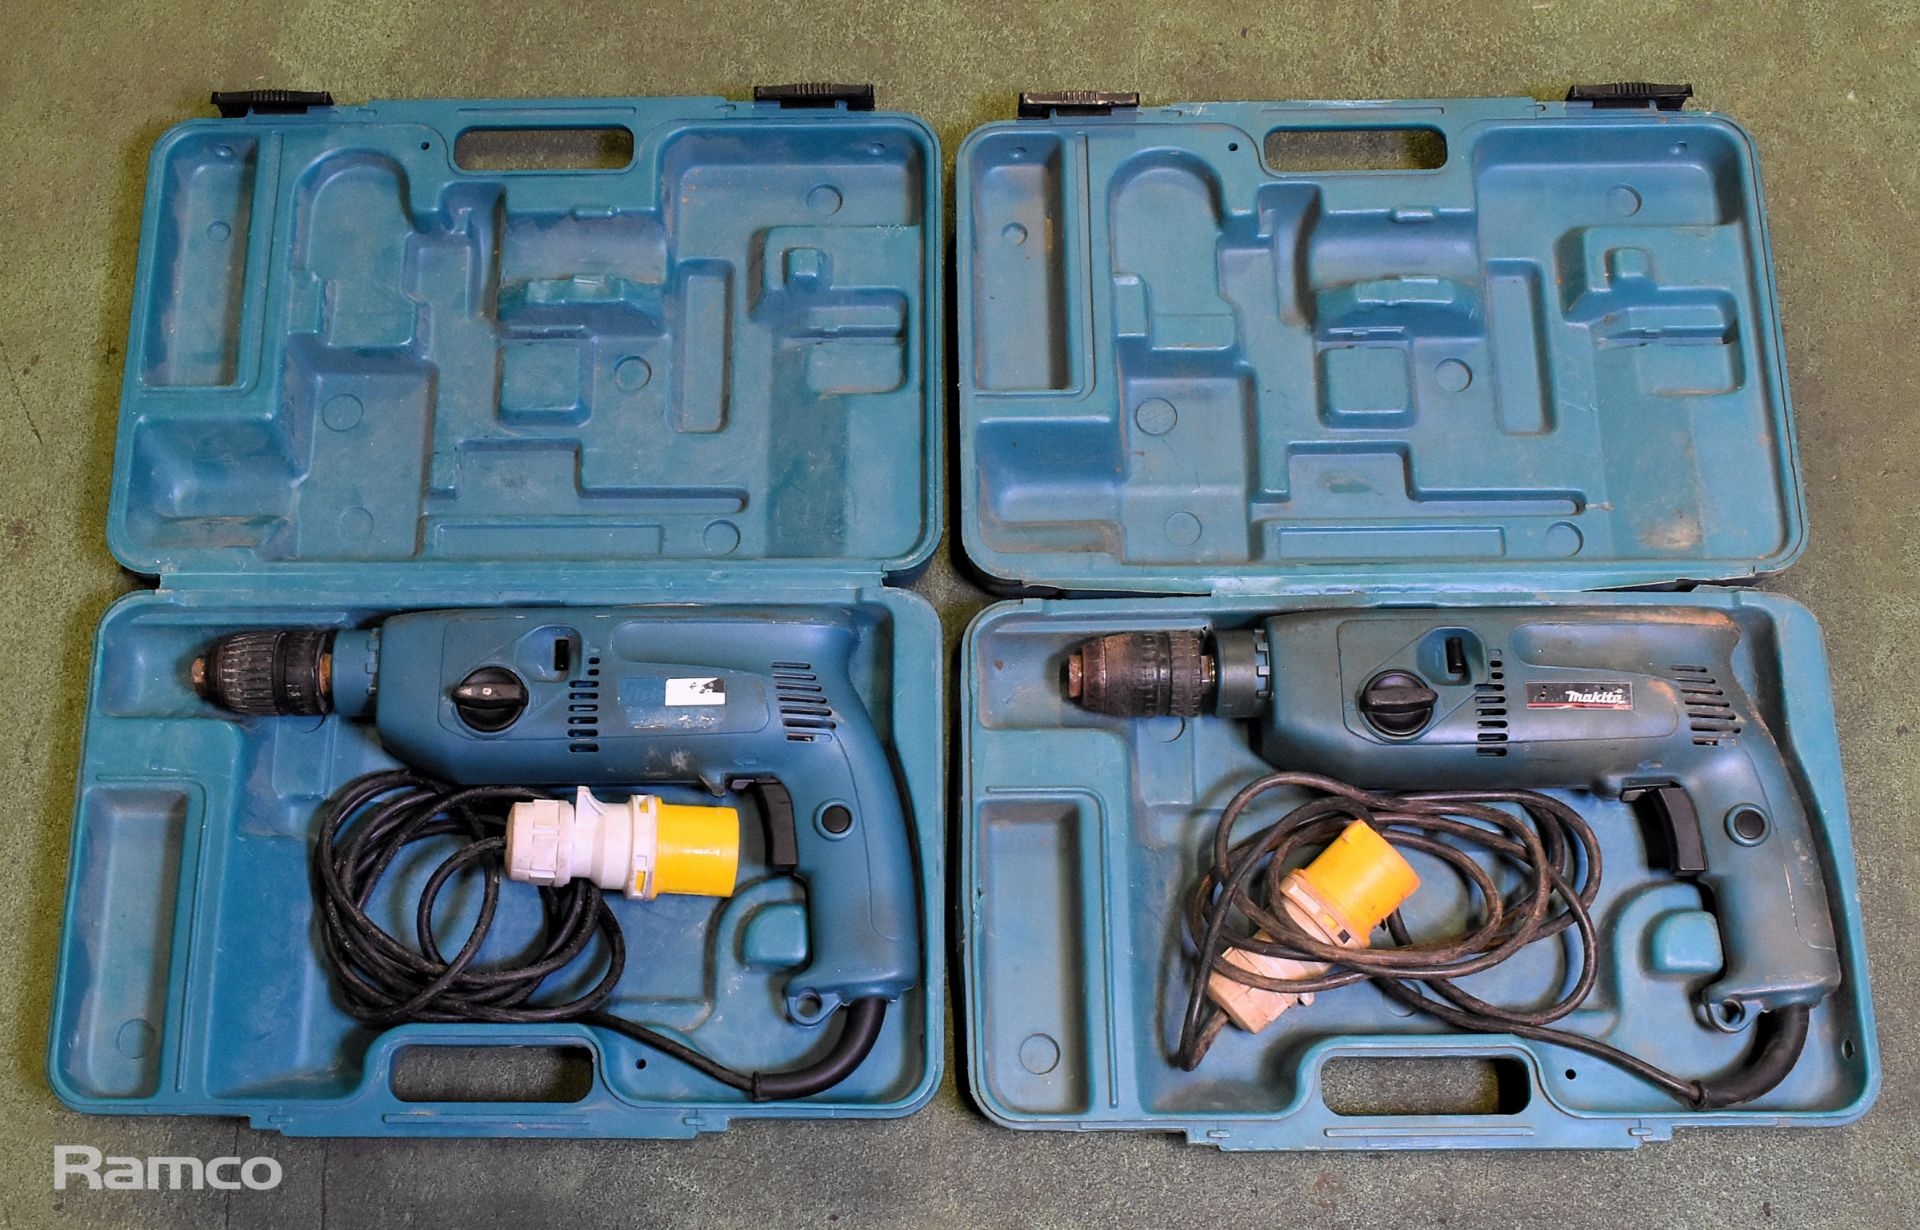 2x Makita HP2041 110V electric rotary hammer drills with case